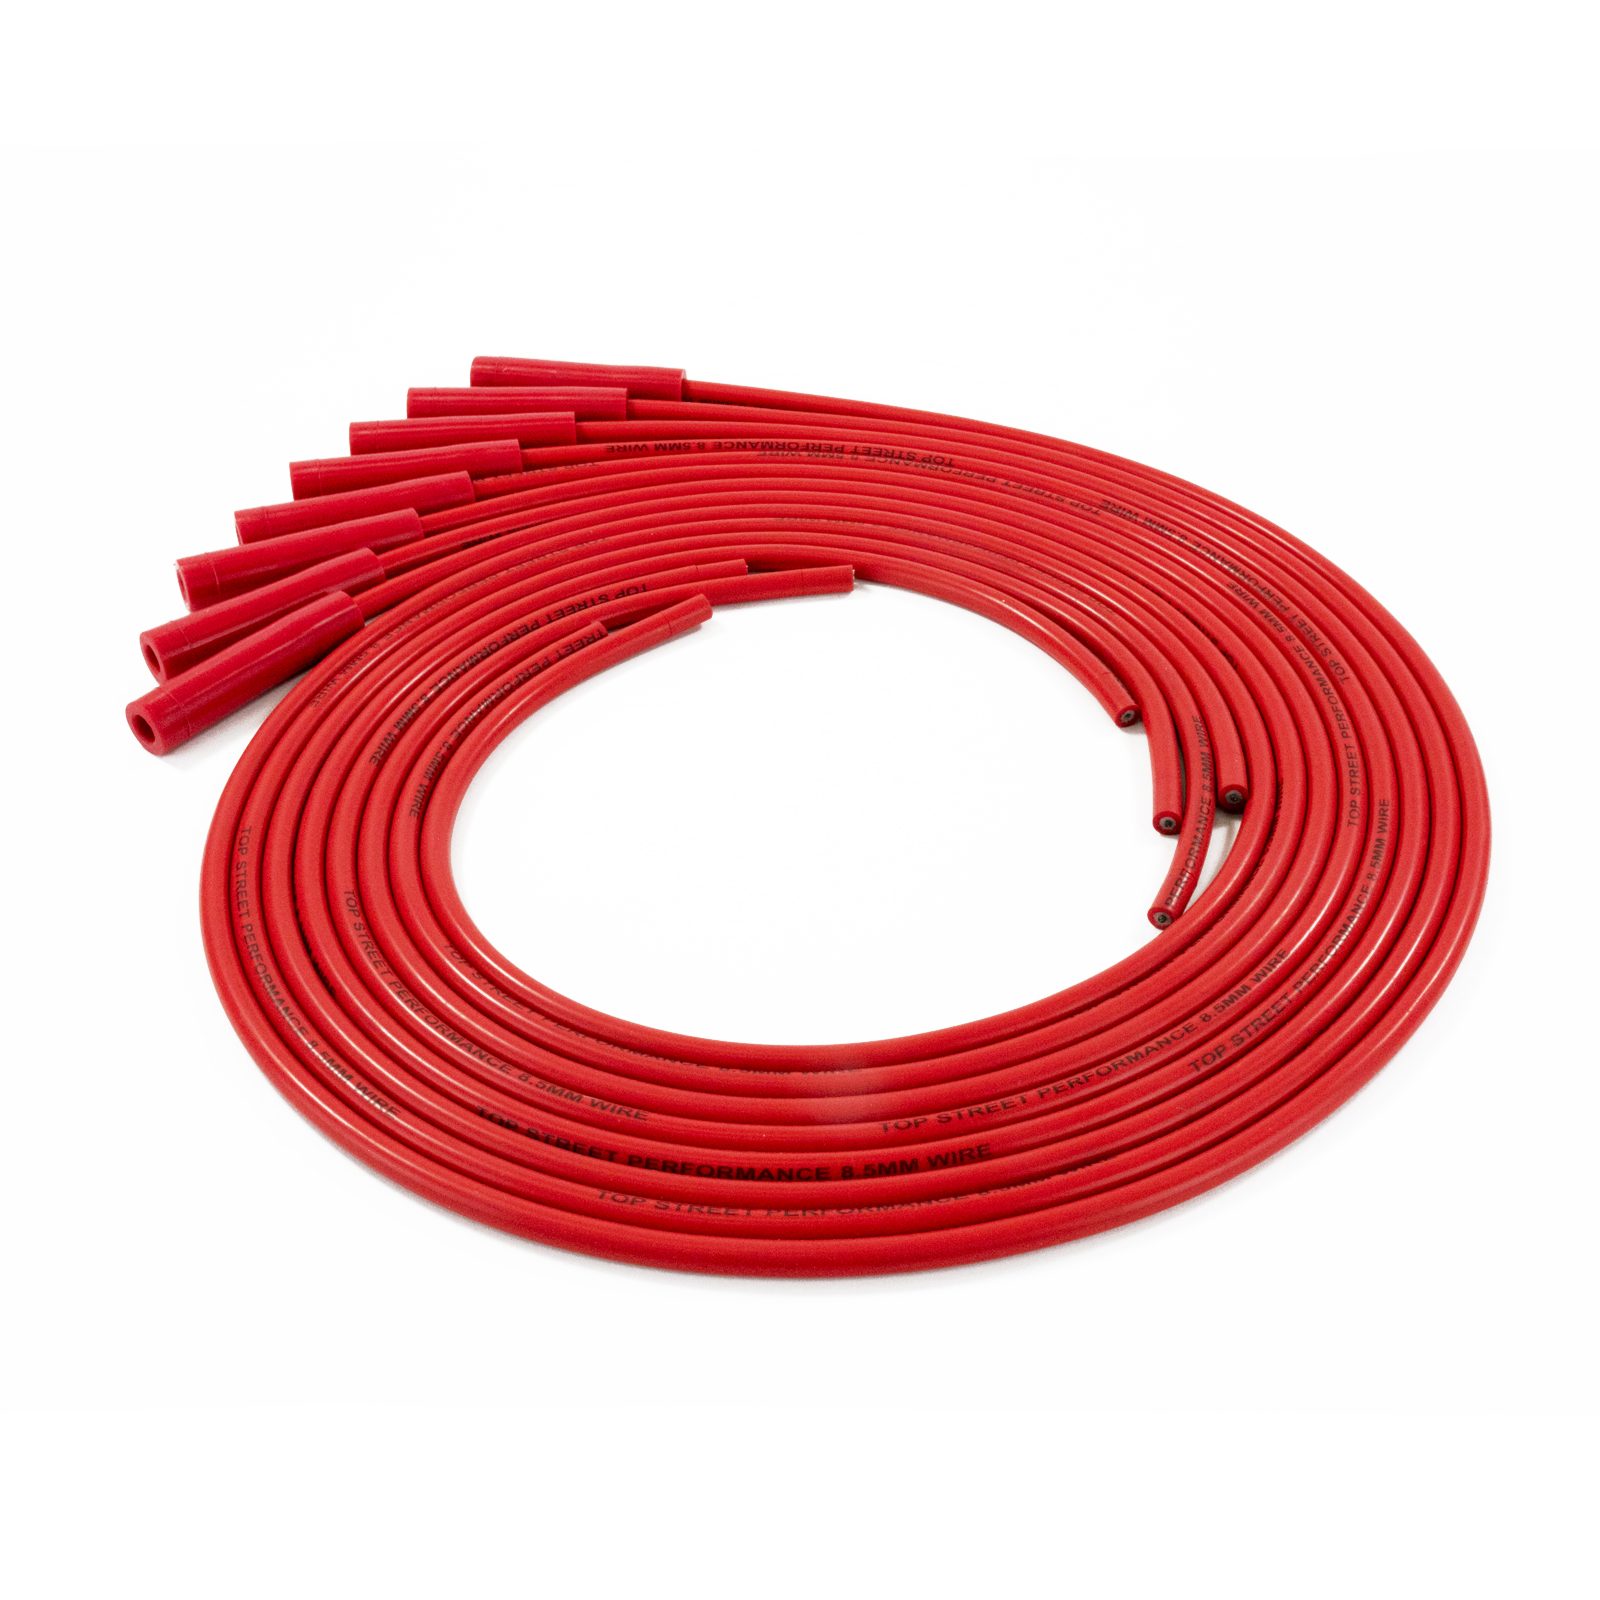 8.5mm Universal Red Ignition Wires with Straight Plug Boots